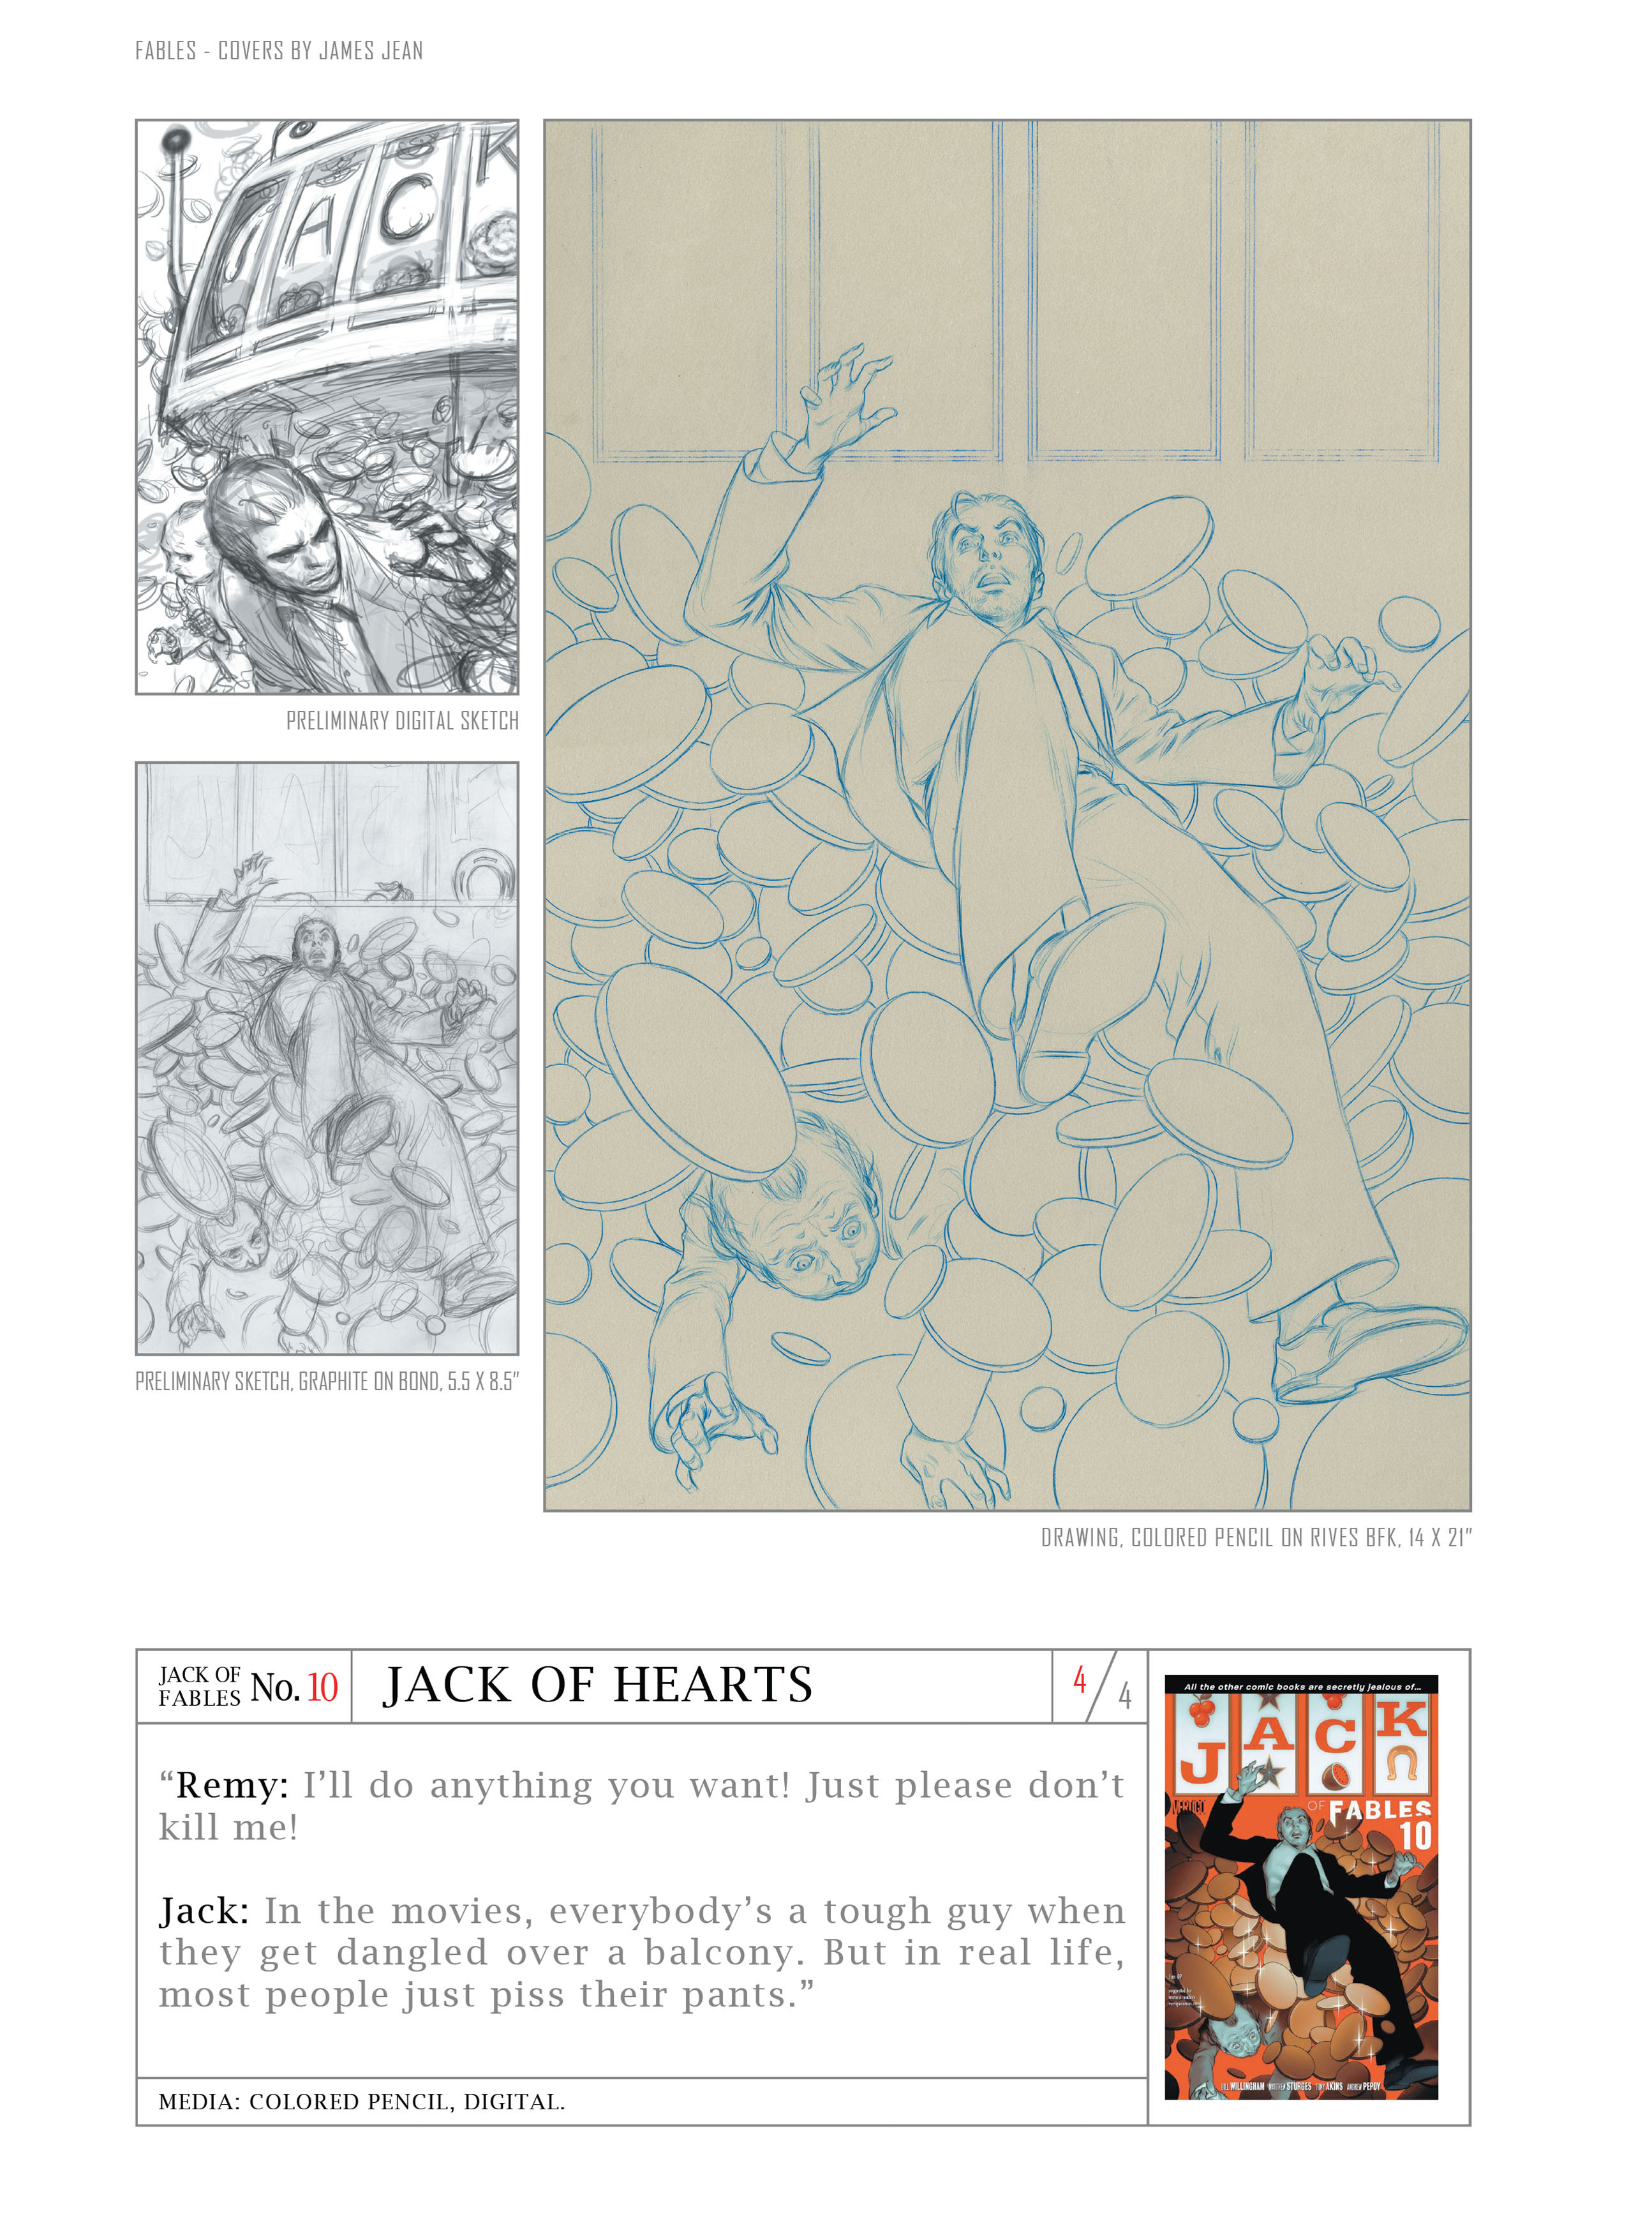 Read online Fables: Covers by James Jean comic -  Issue # TPB (Part 3) - 22